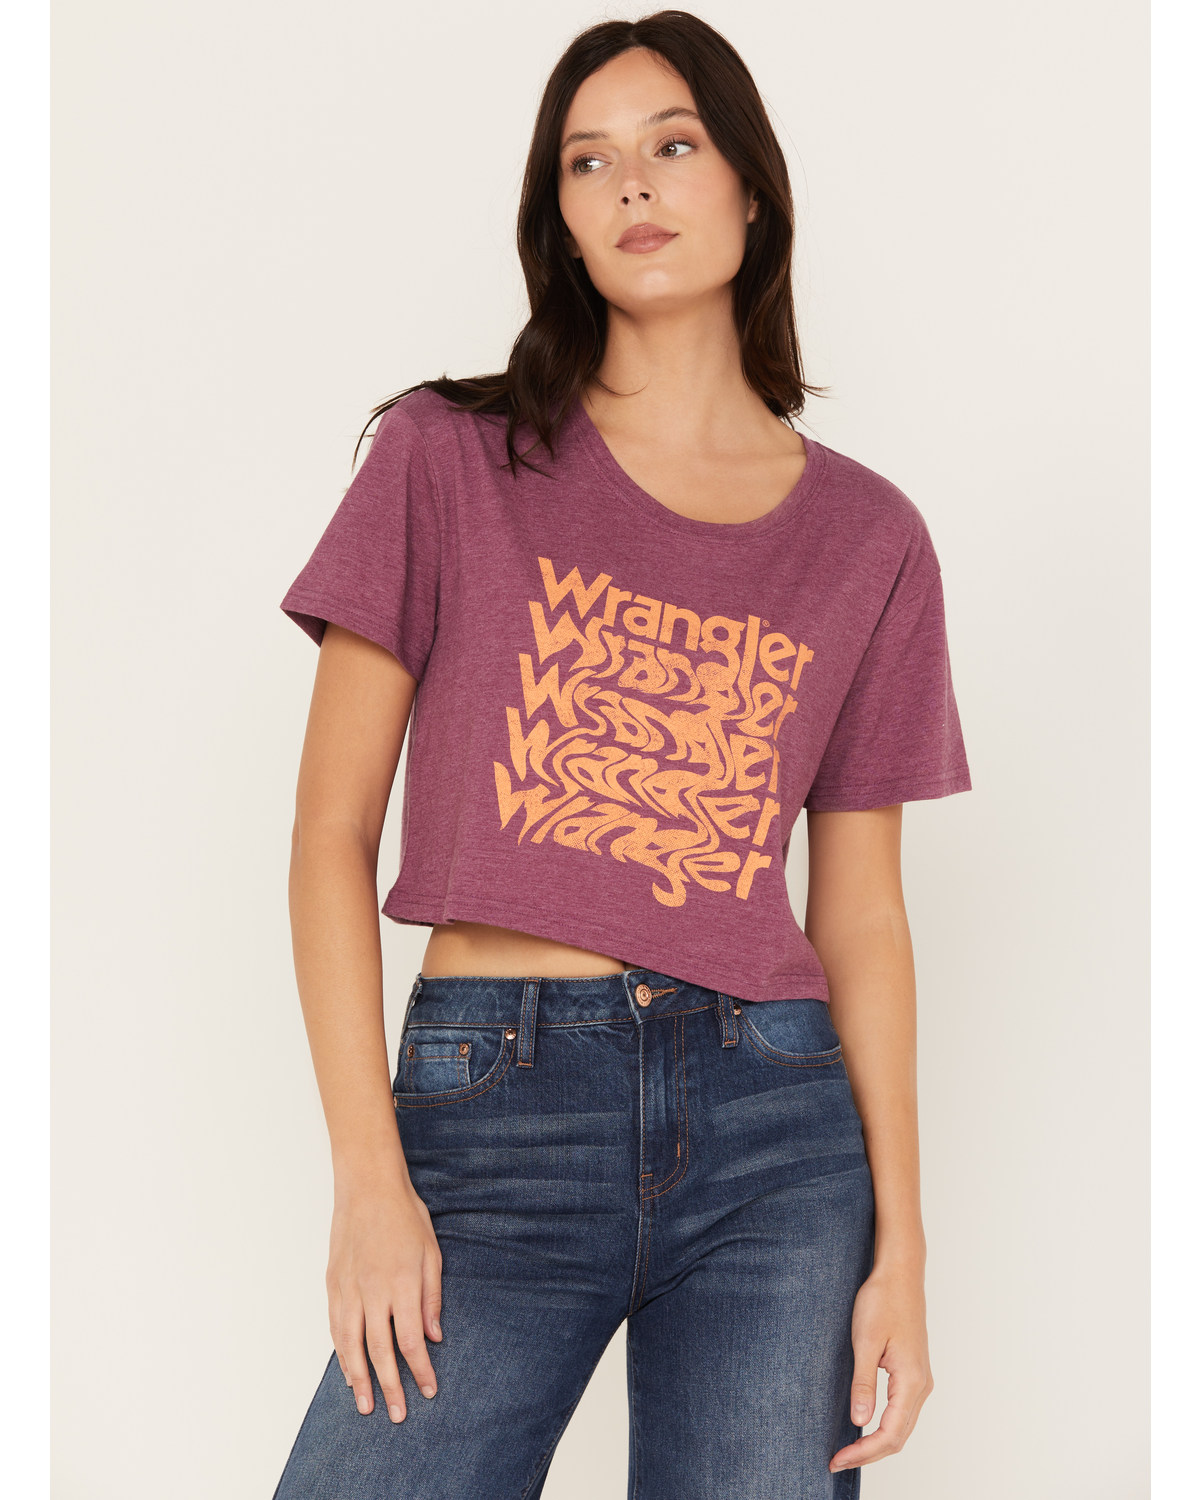 Wrangler Women's Trippy Boxy Cropped Graphic Tee